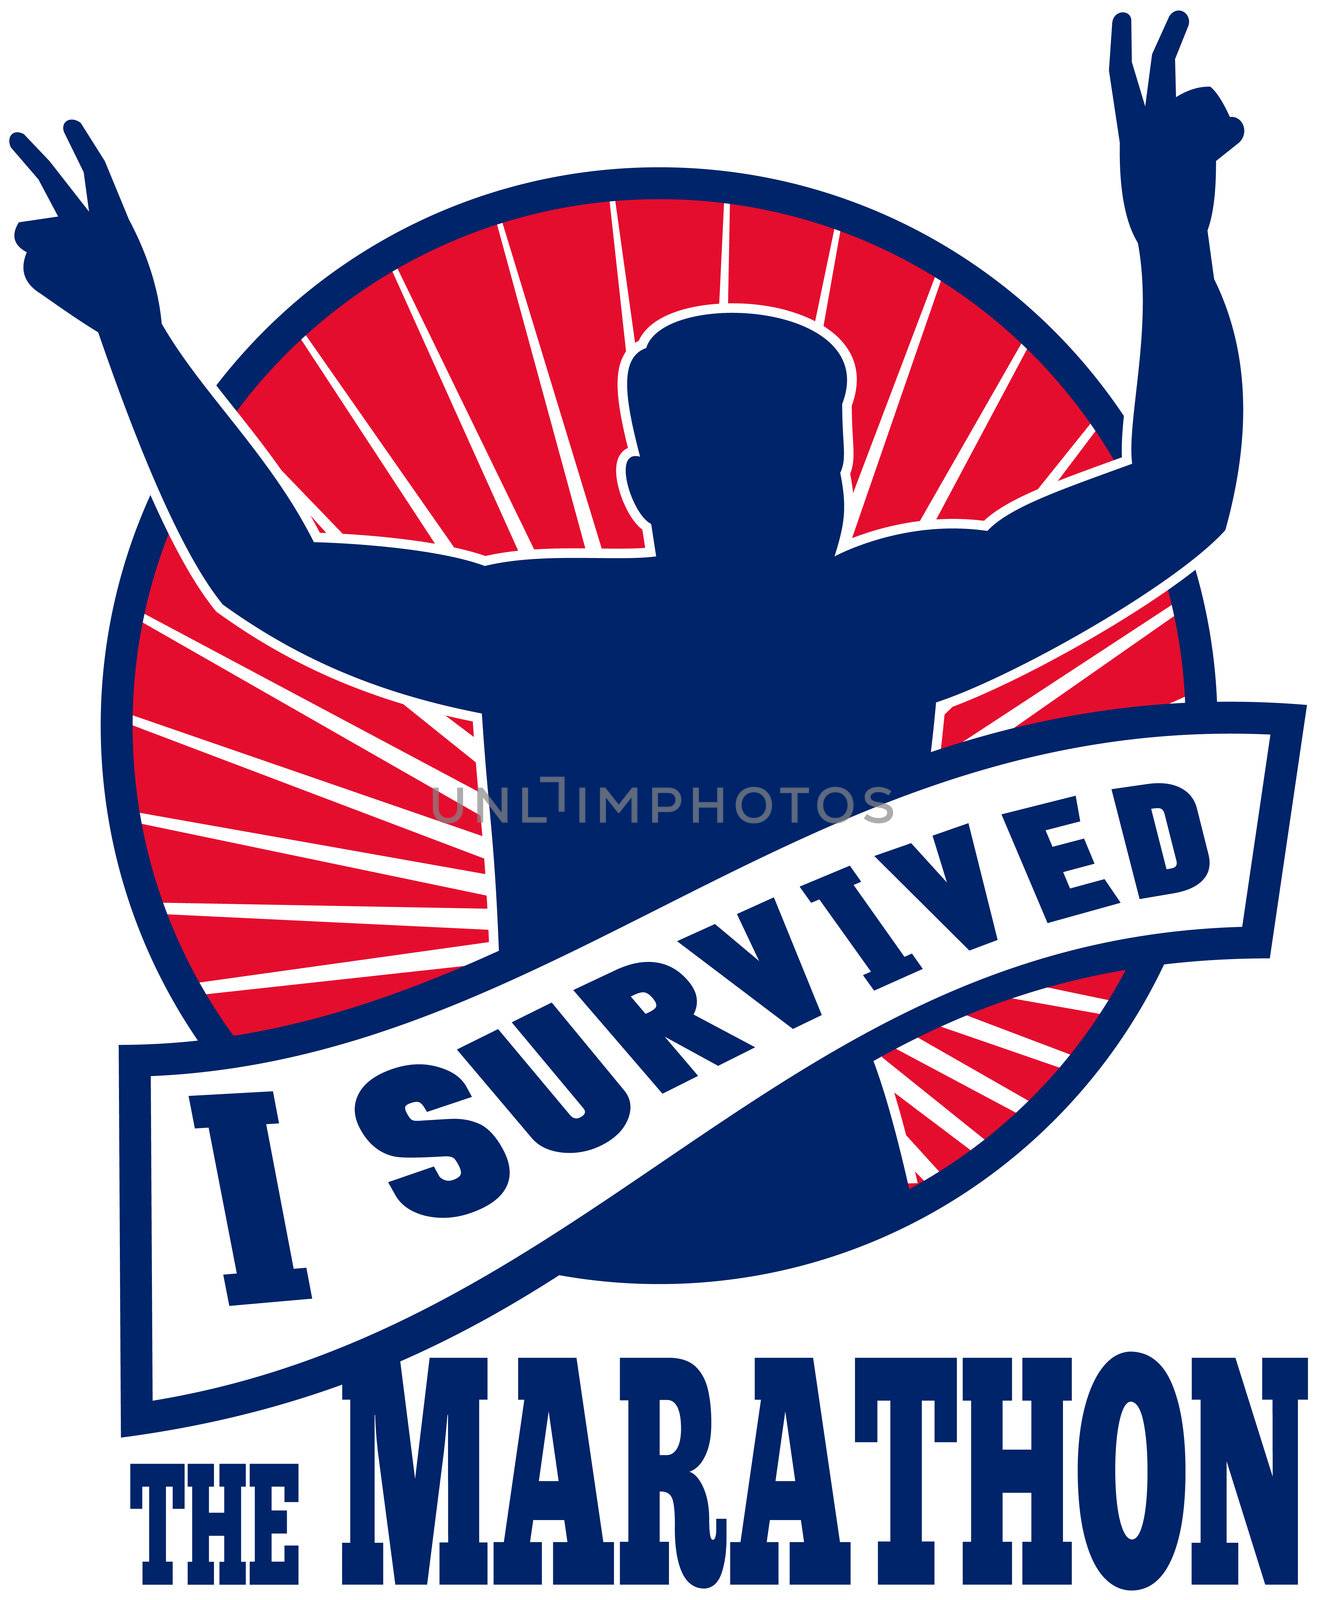 illustration of a silhouette of Marathon runner flashing victory hand sign done in retro style with   sunburst set inside circle with words "i survived the marathon"